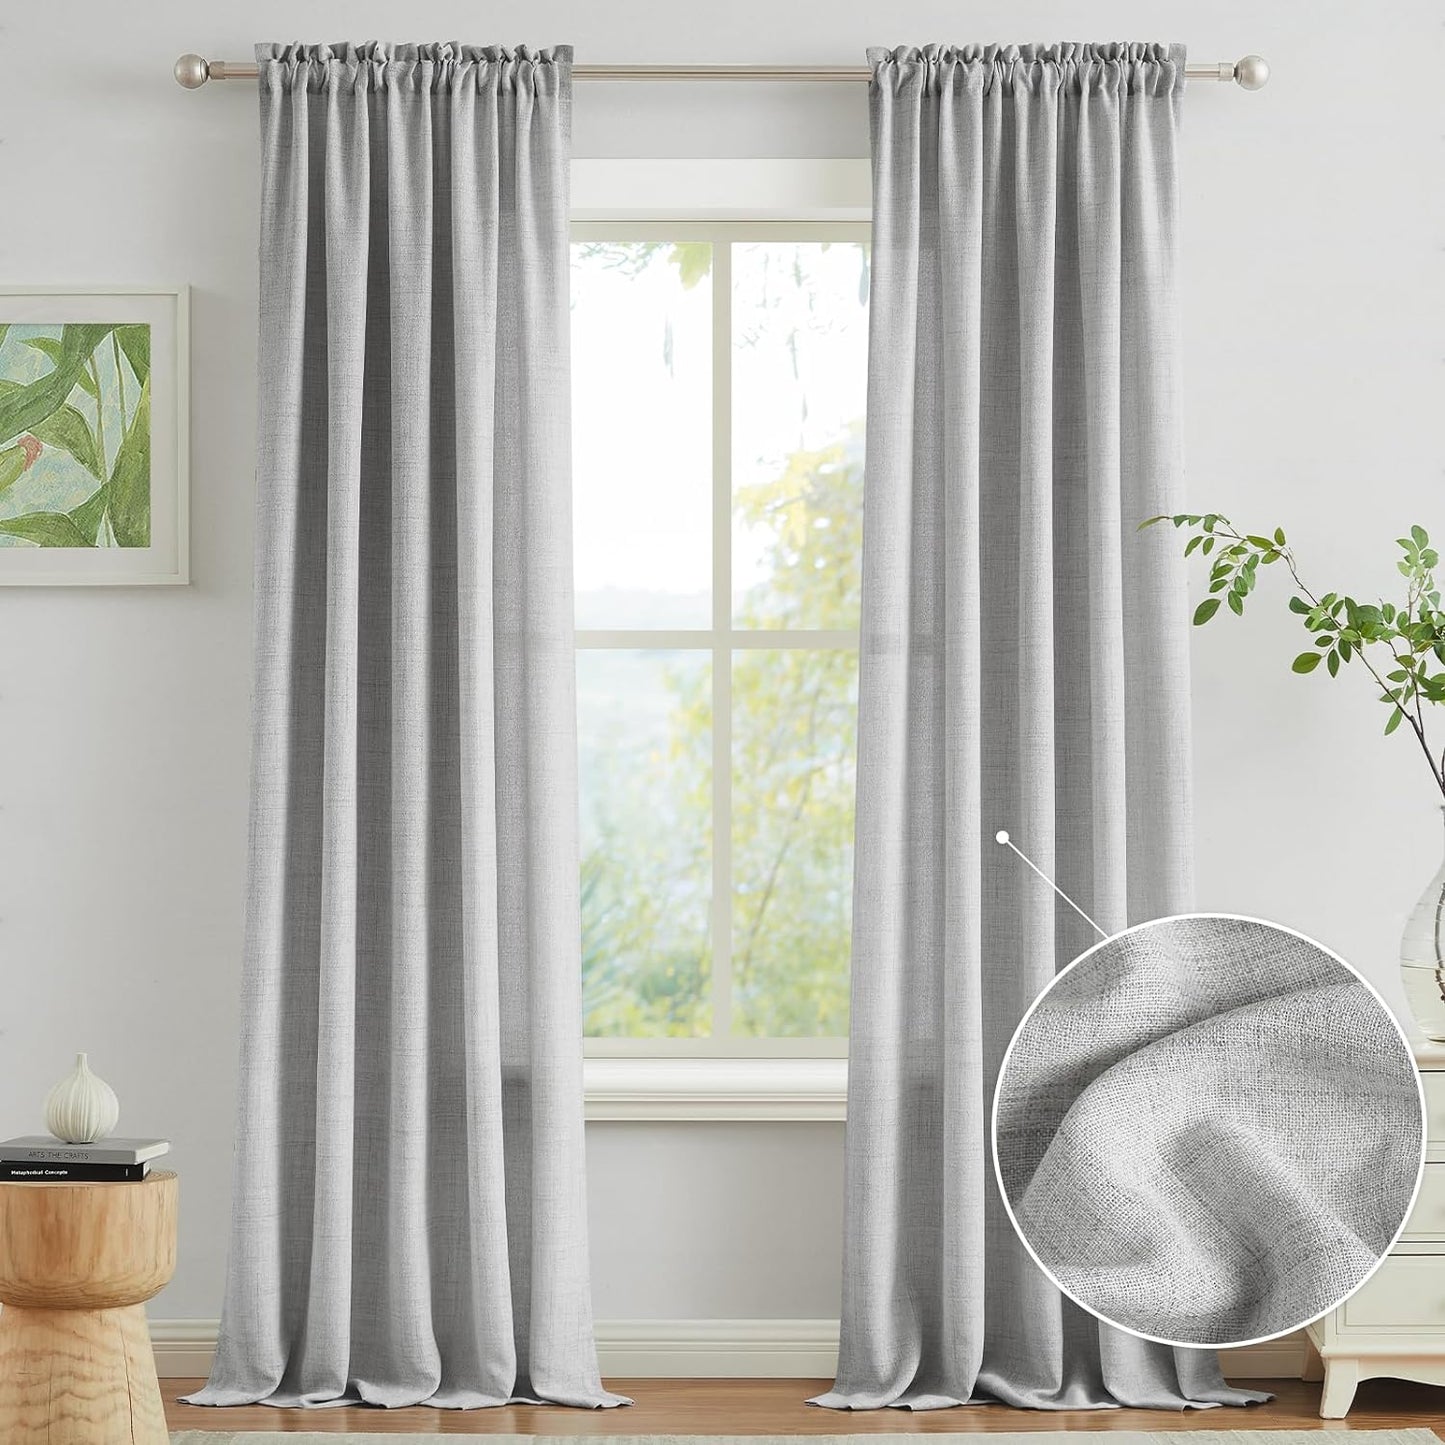 Melodieux Linen Curtains 84 Inches Long for Bedroom - Rod Pocket Burlap Linen Textured Semi Sheer Curtains Light Filtering Privacy Farmhouse Living Room Drapes (Set of 2, 52Inch X 84Inch, Beige)  Melodieux Light Grey W52" X L108" 